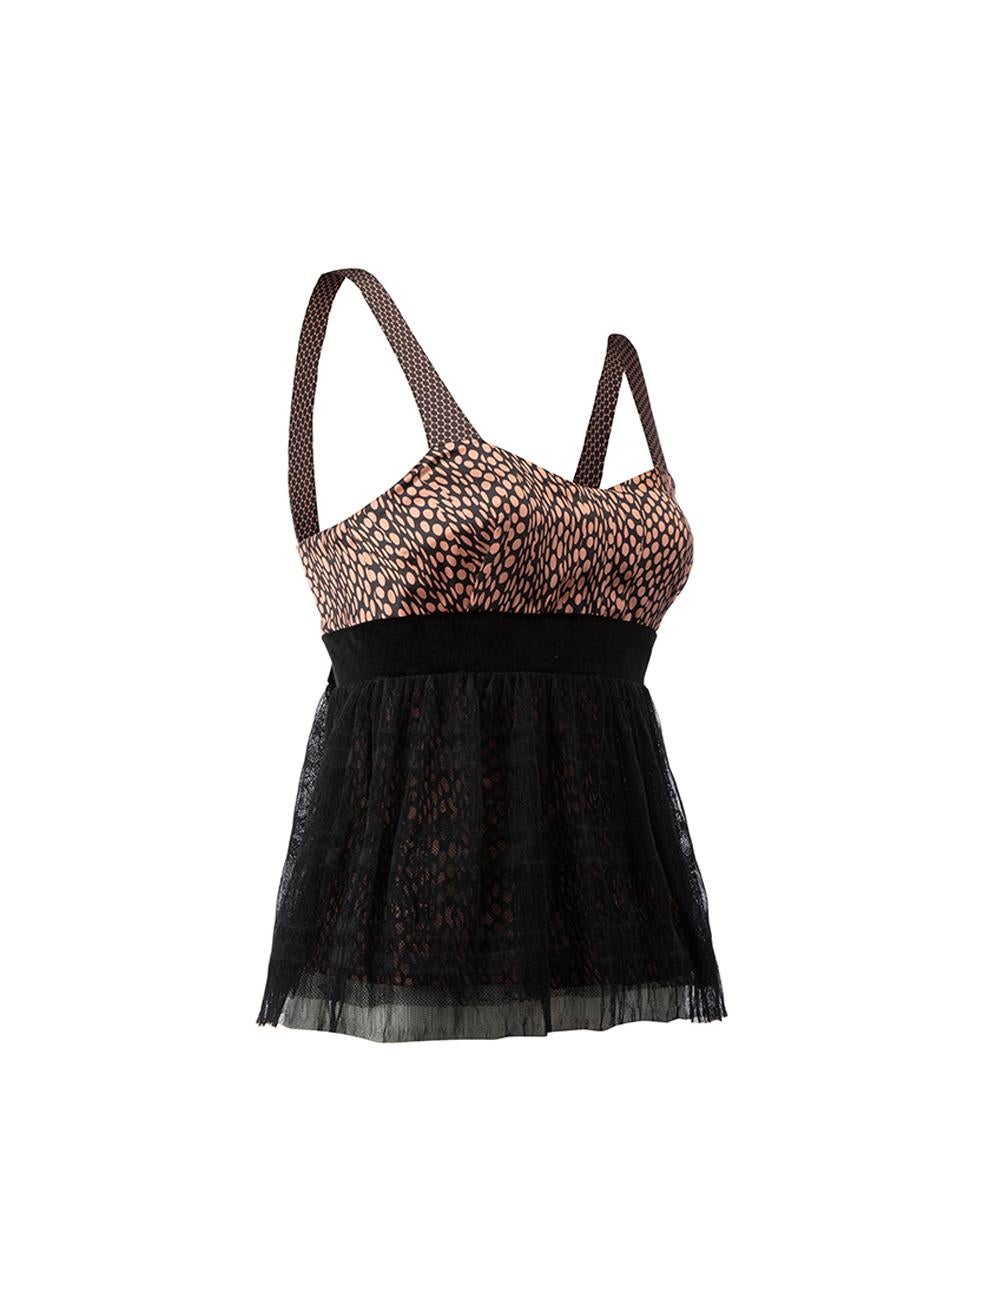 CONDITION is Never worn, with tags. No visible wear to top is evident on this new La Perla designer resale item. 
 
 Details
  Multicolour
 Silk
 Sleeveless top
 Dotted pattern
 Corseted with ruched panel
 Back zip closure with hook and eye
 Peplum